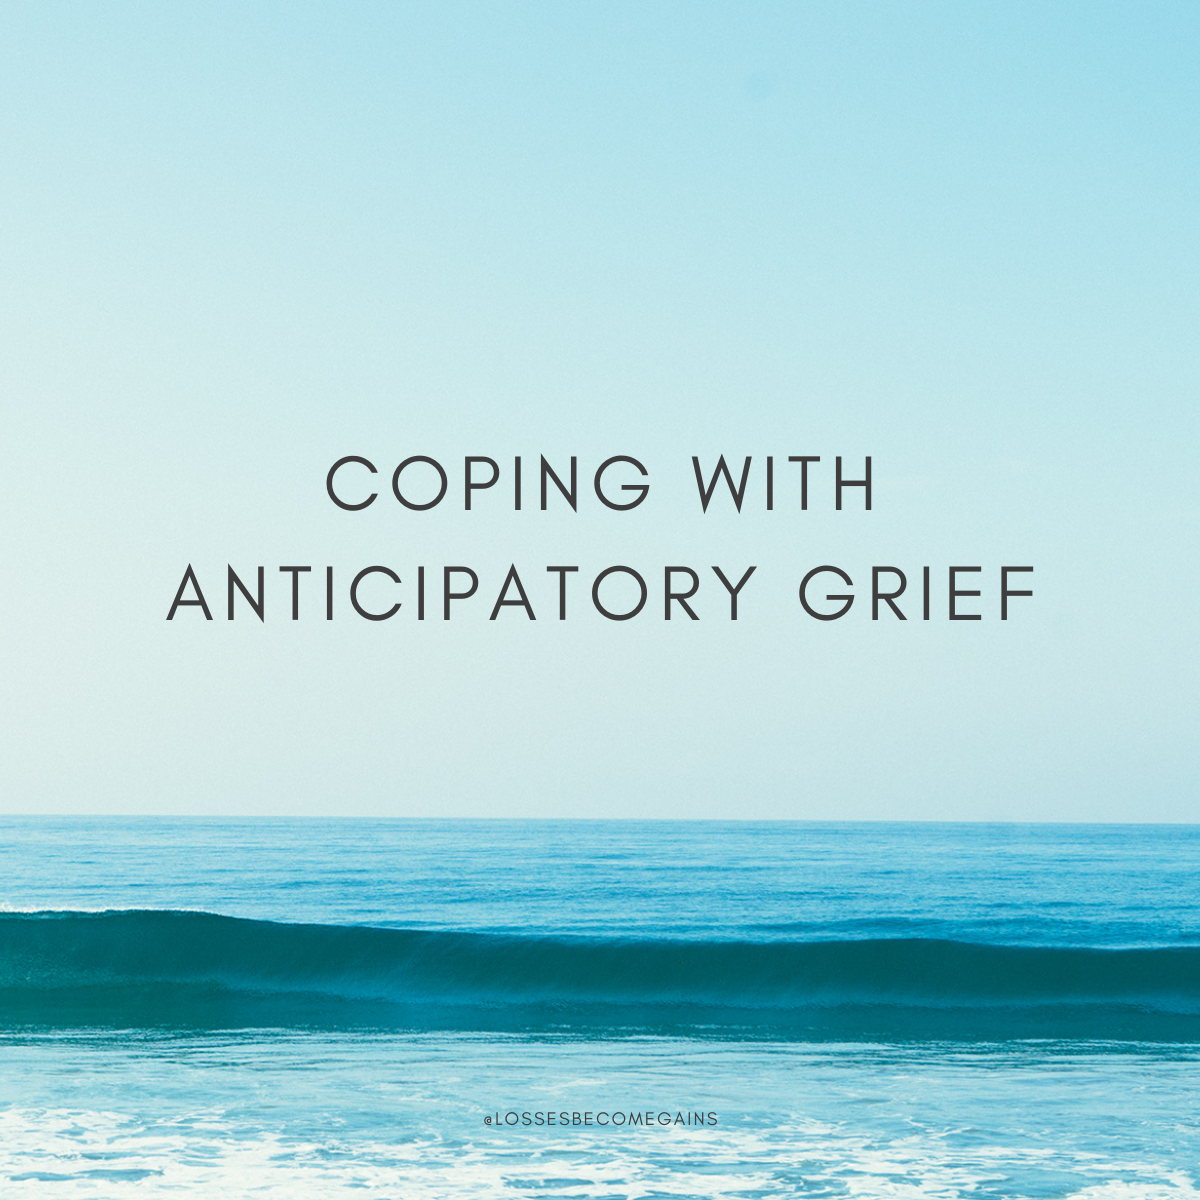 The words Coping with Anticipatory Grief against a blue sky with gentle ocean waves